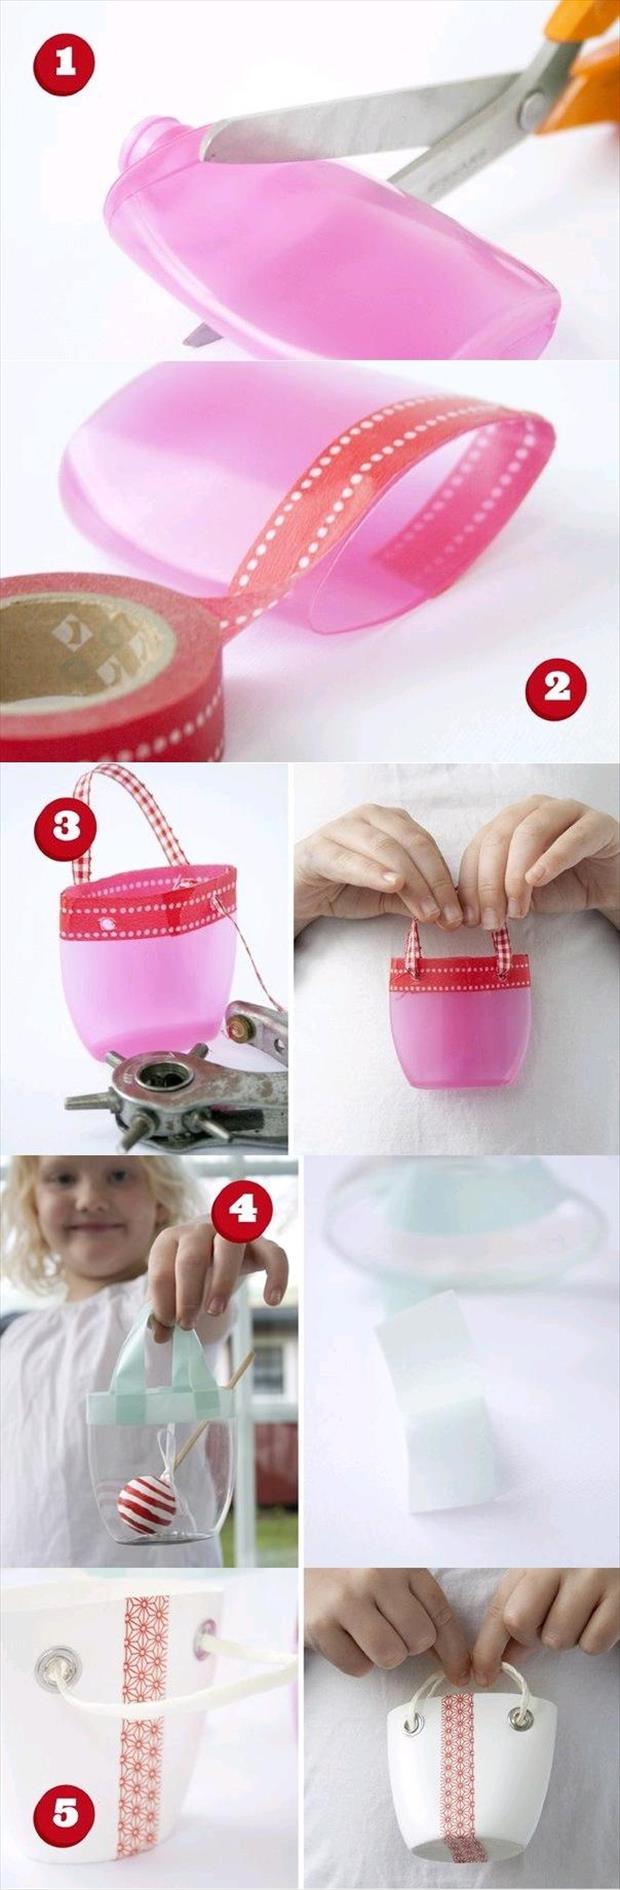 how to make a small purse